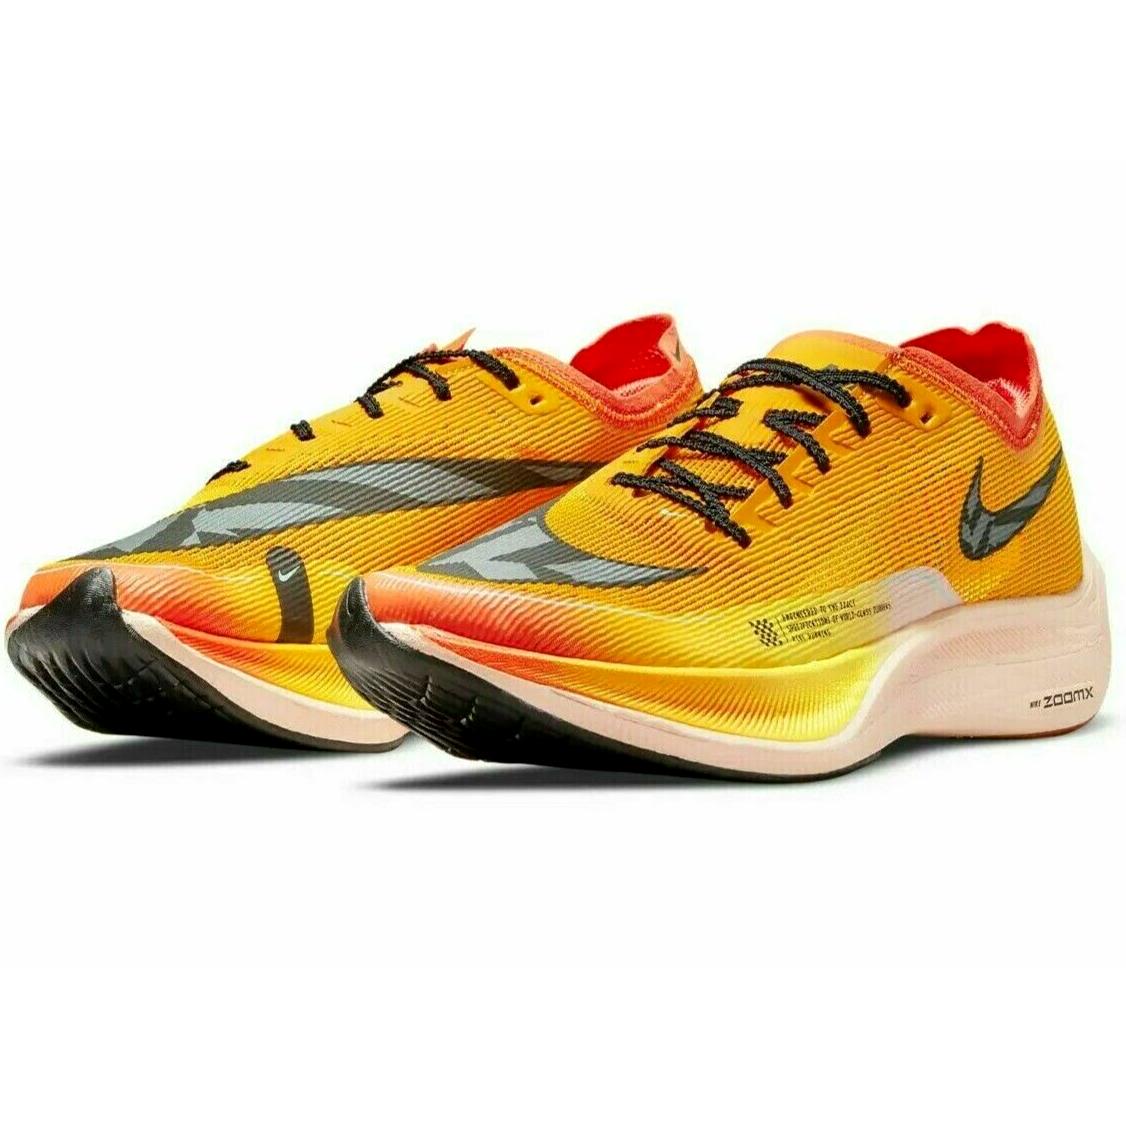 Nike Zoomx Vaporfly Next% 2 Mens Size 6 Sneaker Shoes DO2408 739 Ekiden Pack